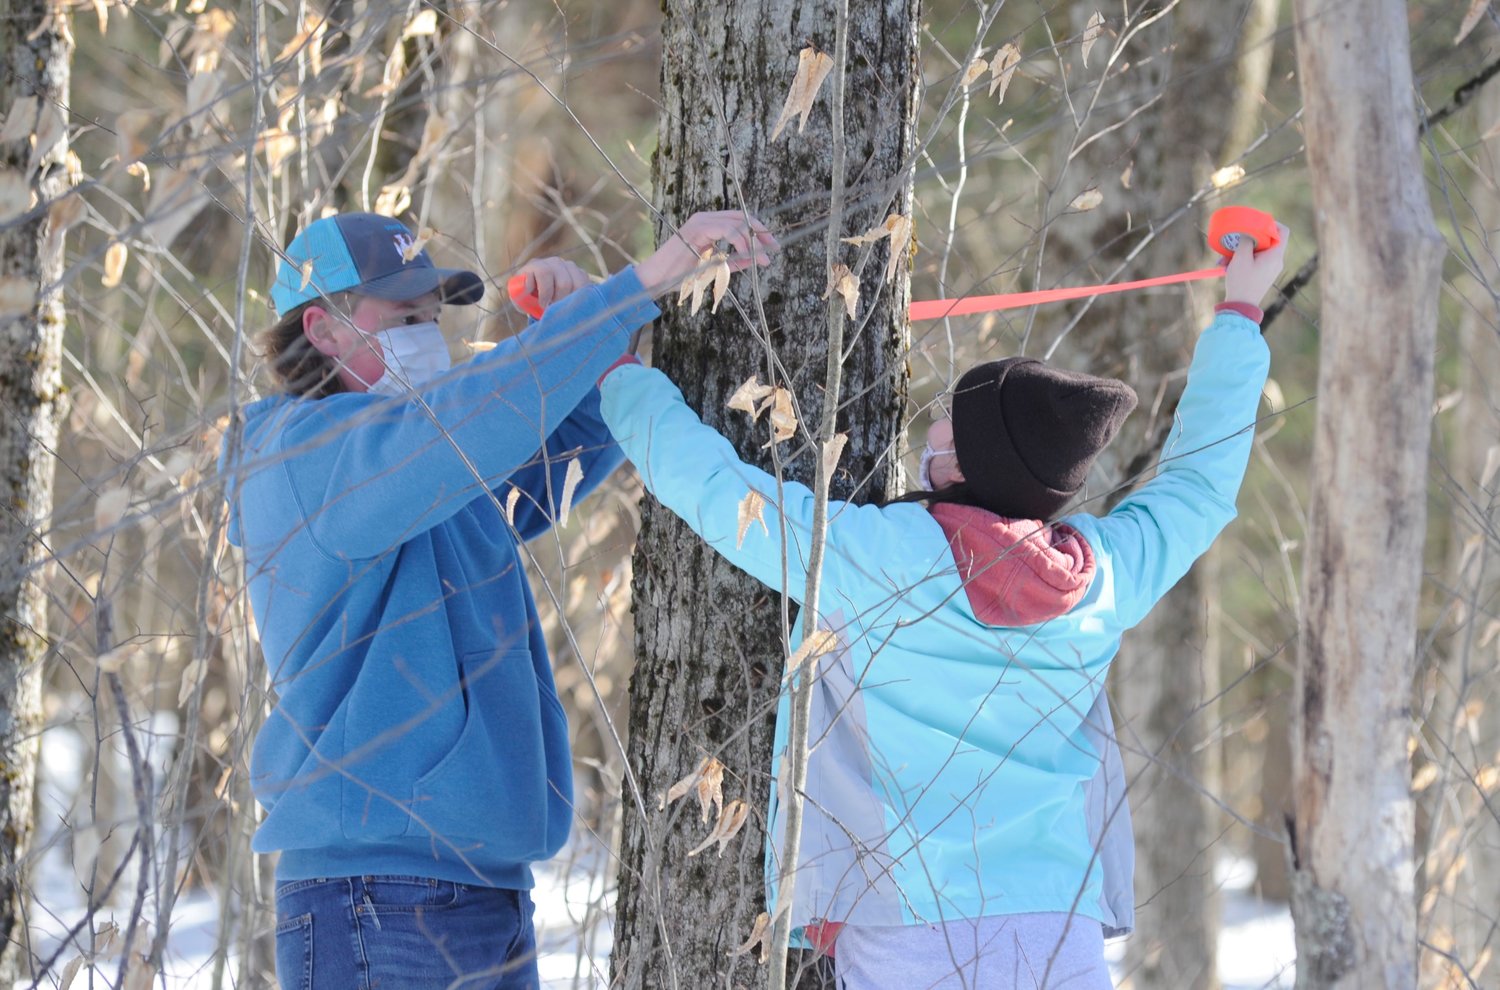 Marking a maple tree. In preparation for tapping the tree, Sullivan West Ag Club students Colin Phelps, left, and Kayla Wilson flag a tree along the school’s cross-country course.